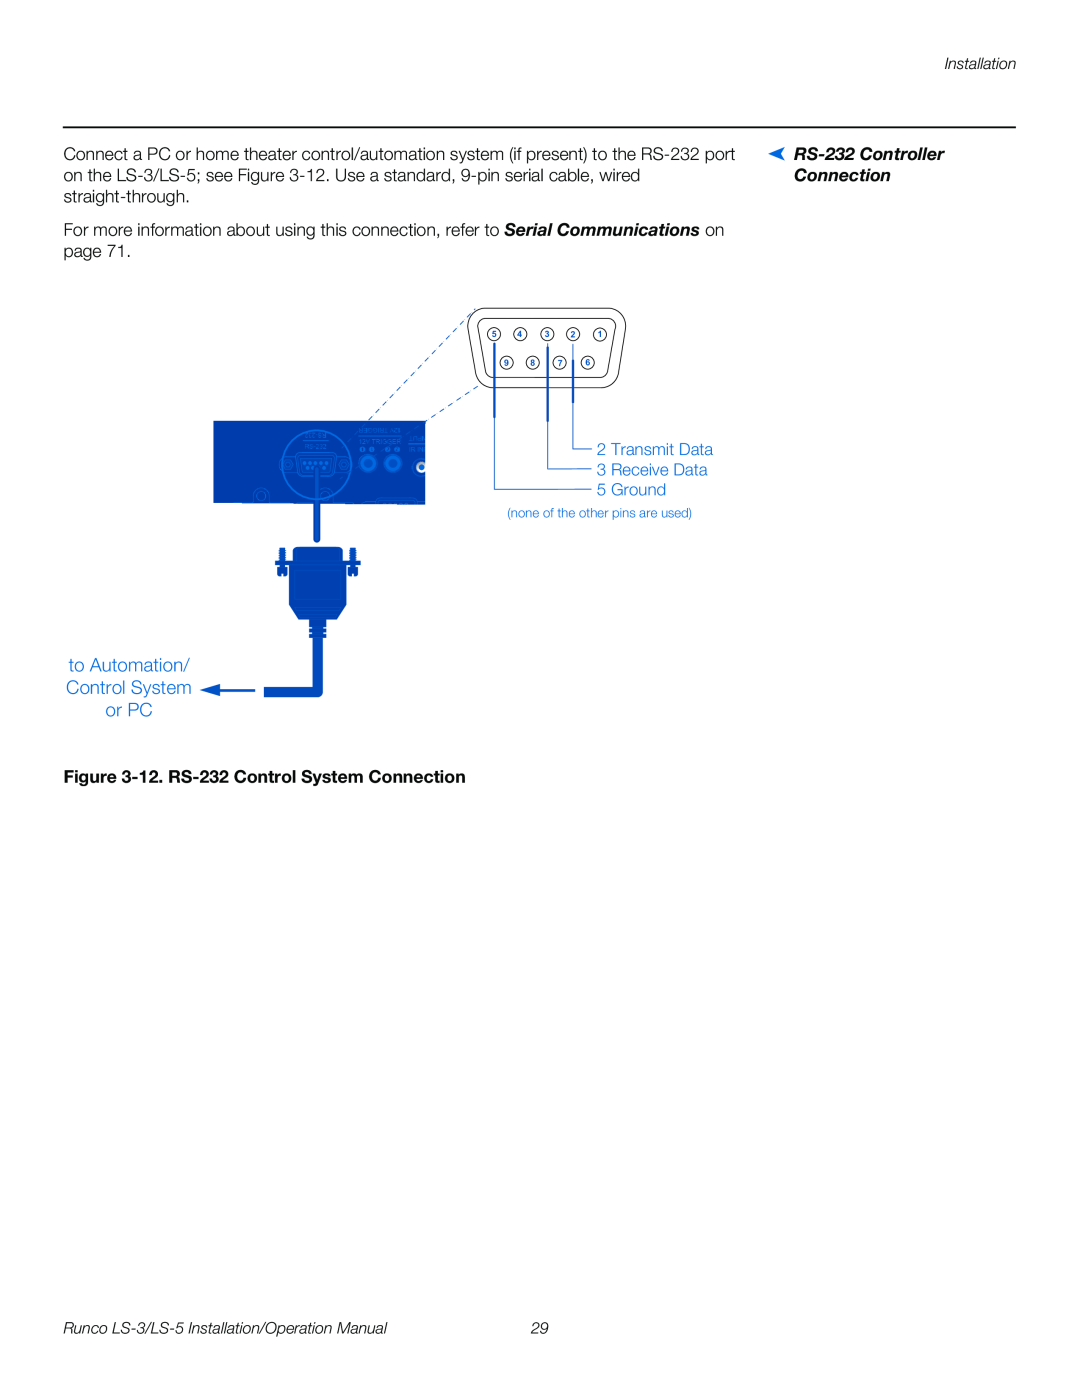 Runco LS-3, LS-5 operation manual to Automation/ Control System or PC, 12. RS-232Control System Connection 